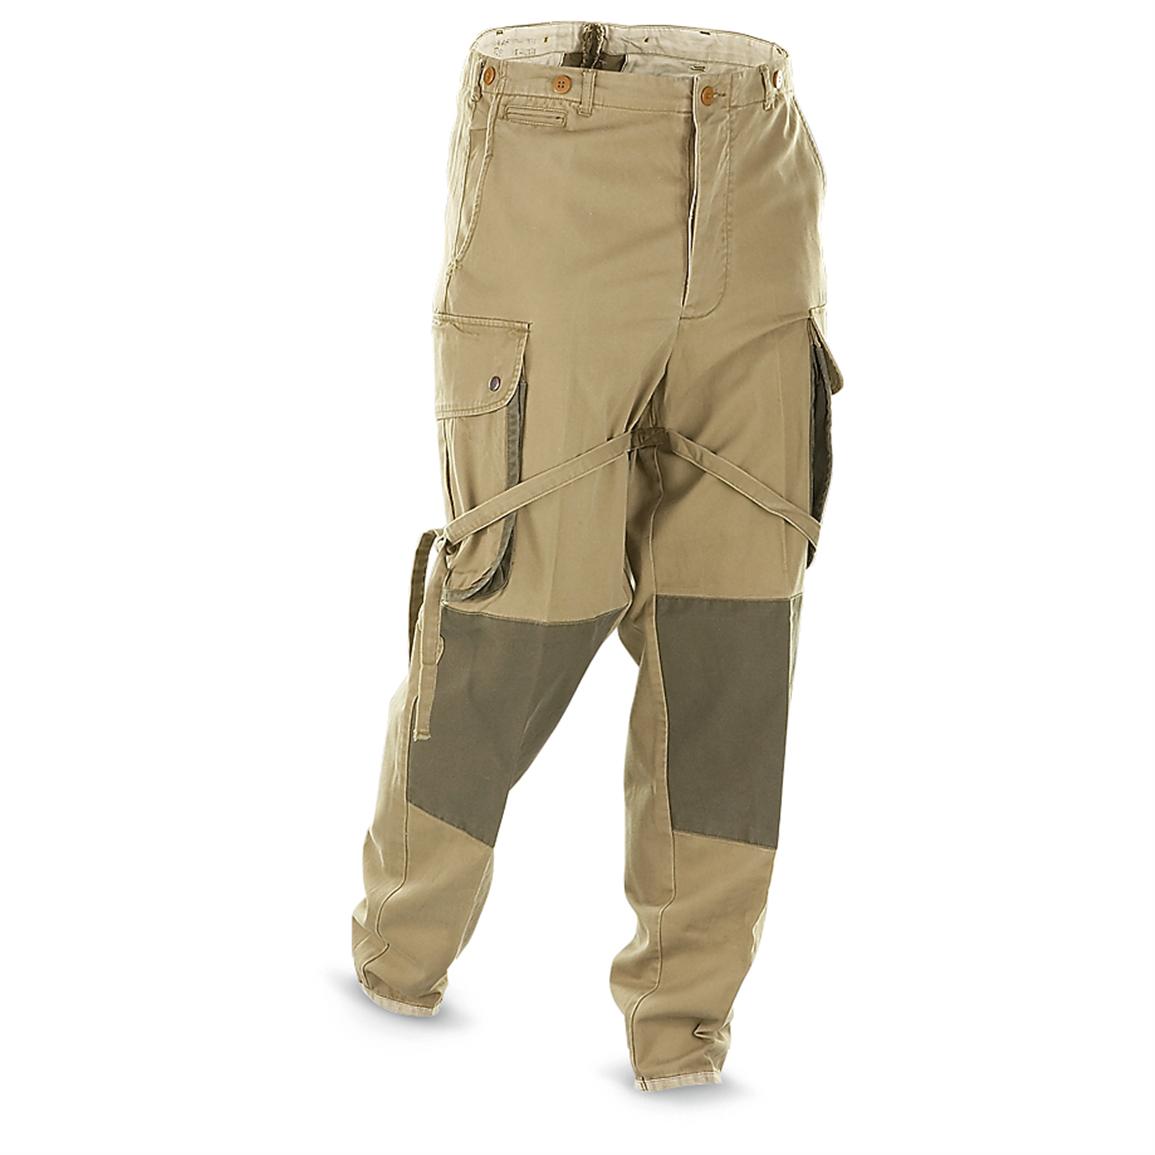 Reproduction WWII U.S. Paratrooper Pants, Khaki - 182897, Field Gear at ...